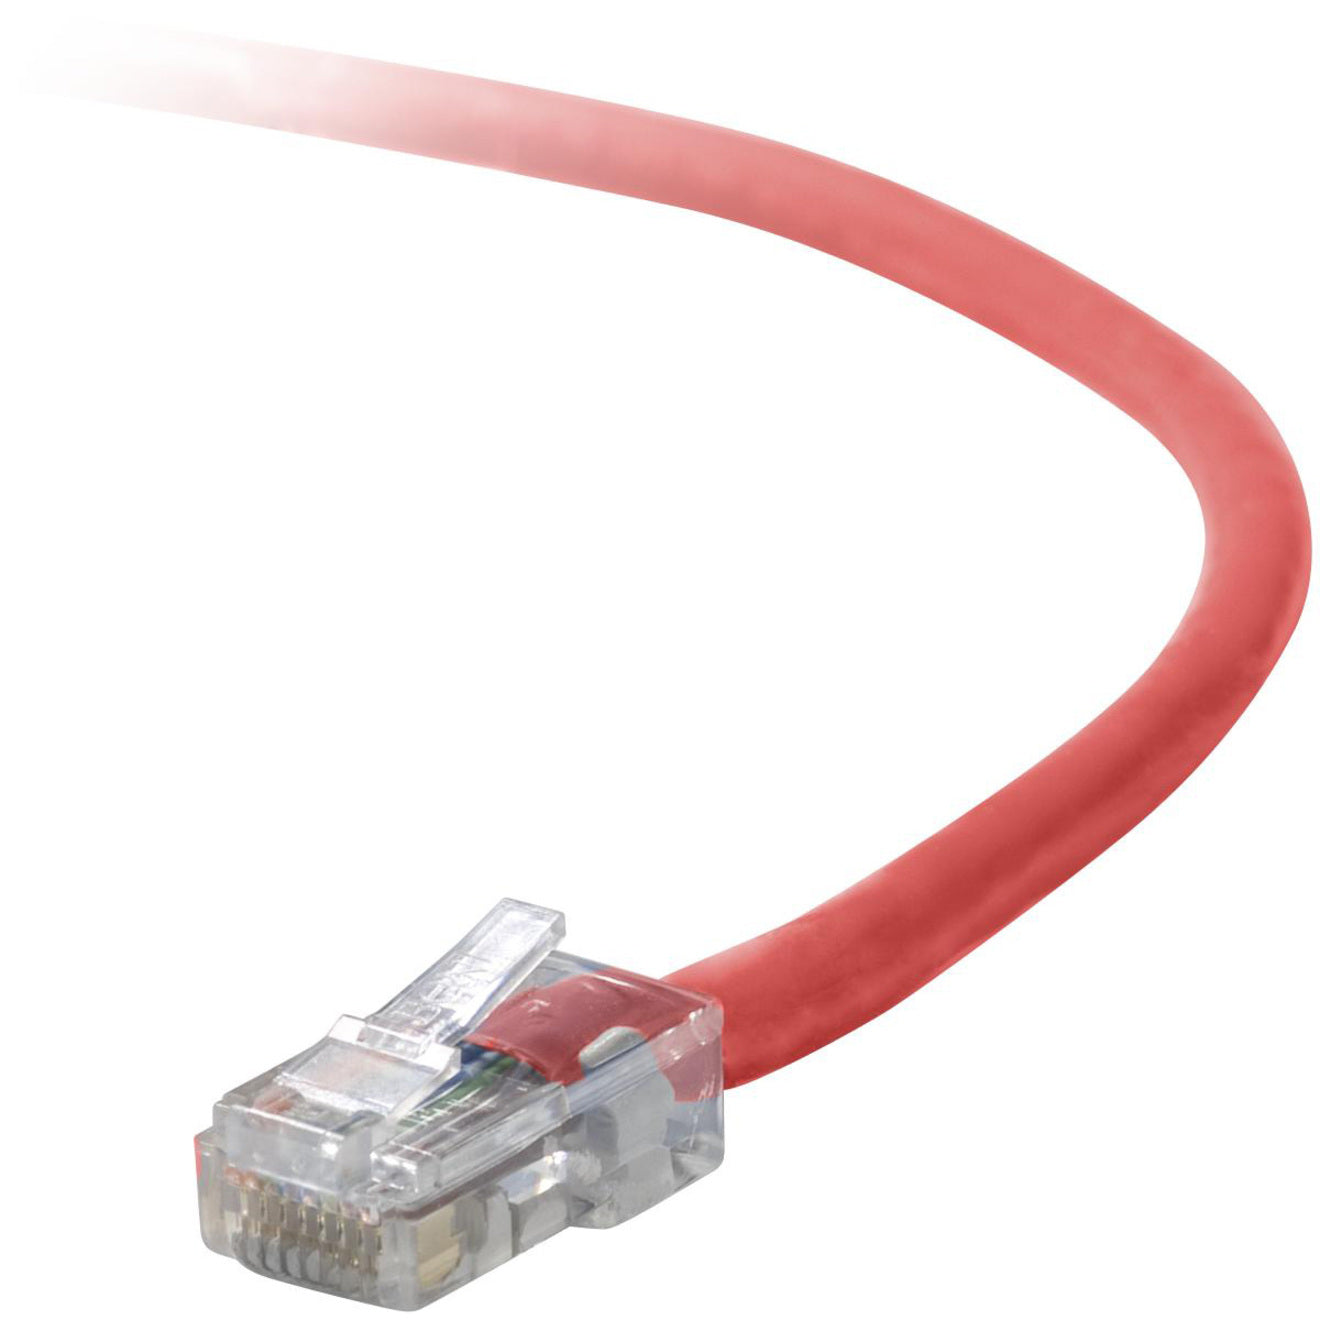 Belkin A3L791-02-RED Cat5e Patch Cable, 2 ft, Red, Lifetime Warranty